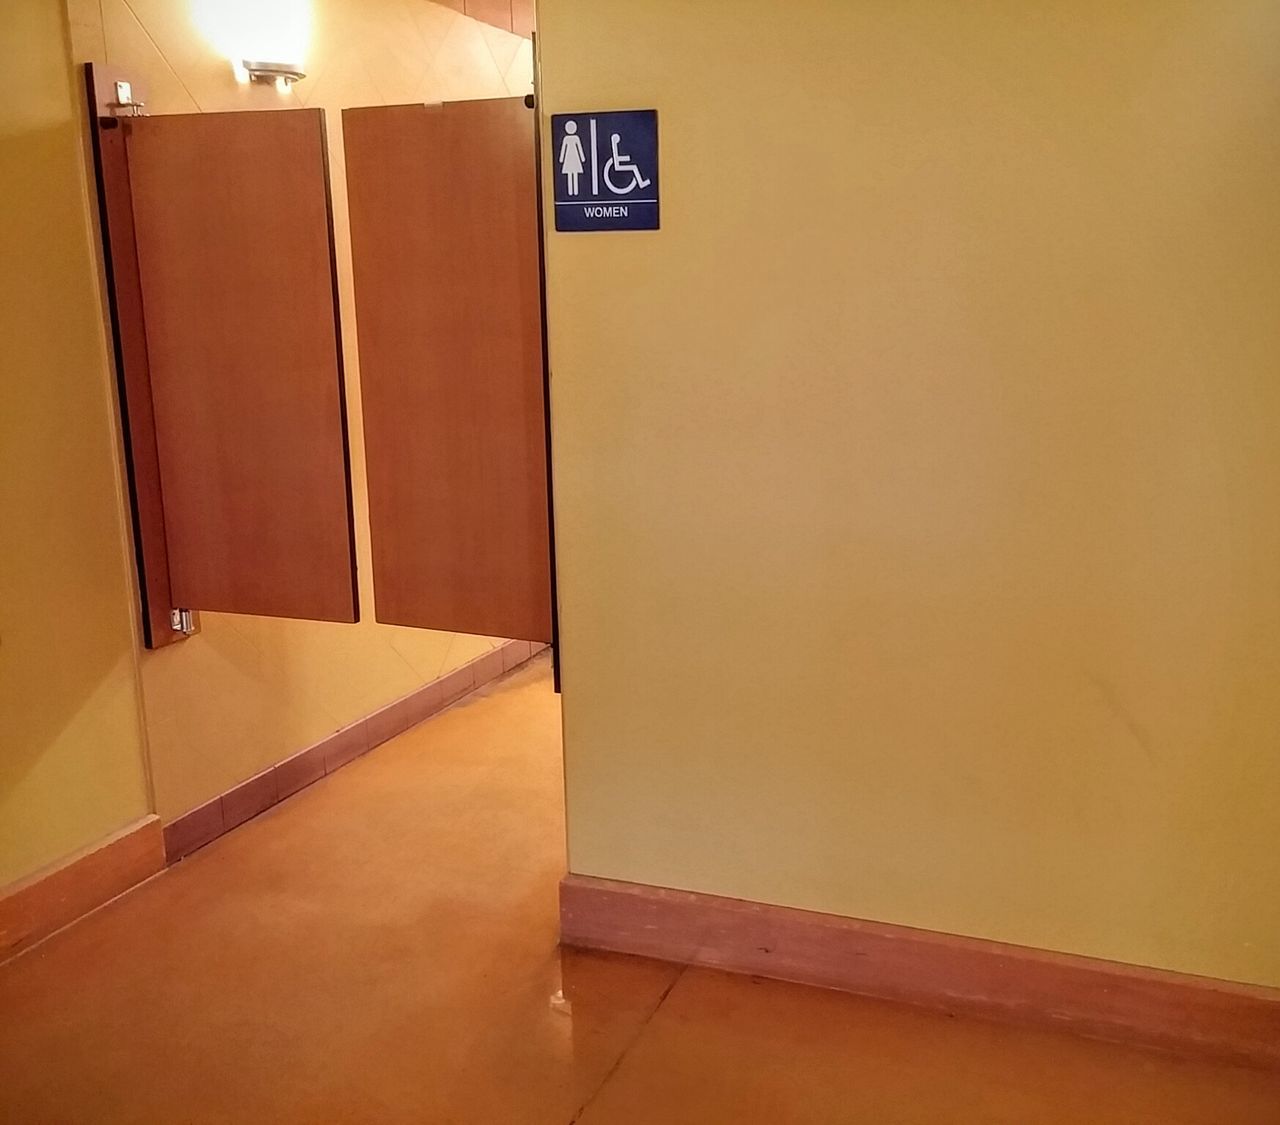 Handicapped accesible